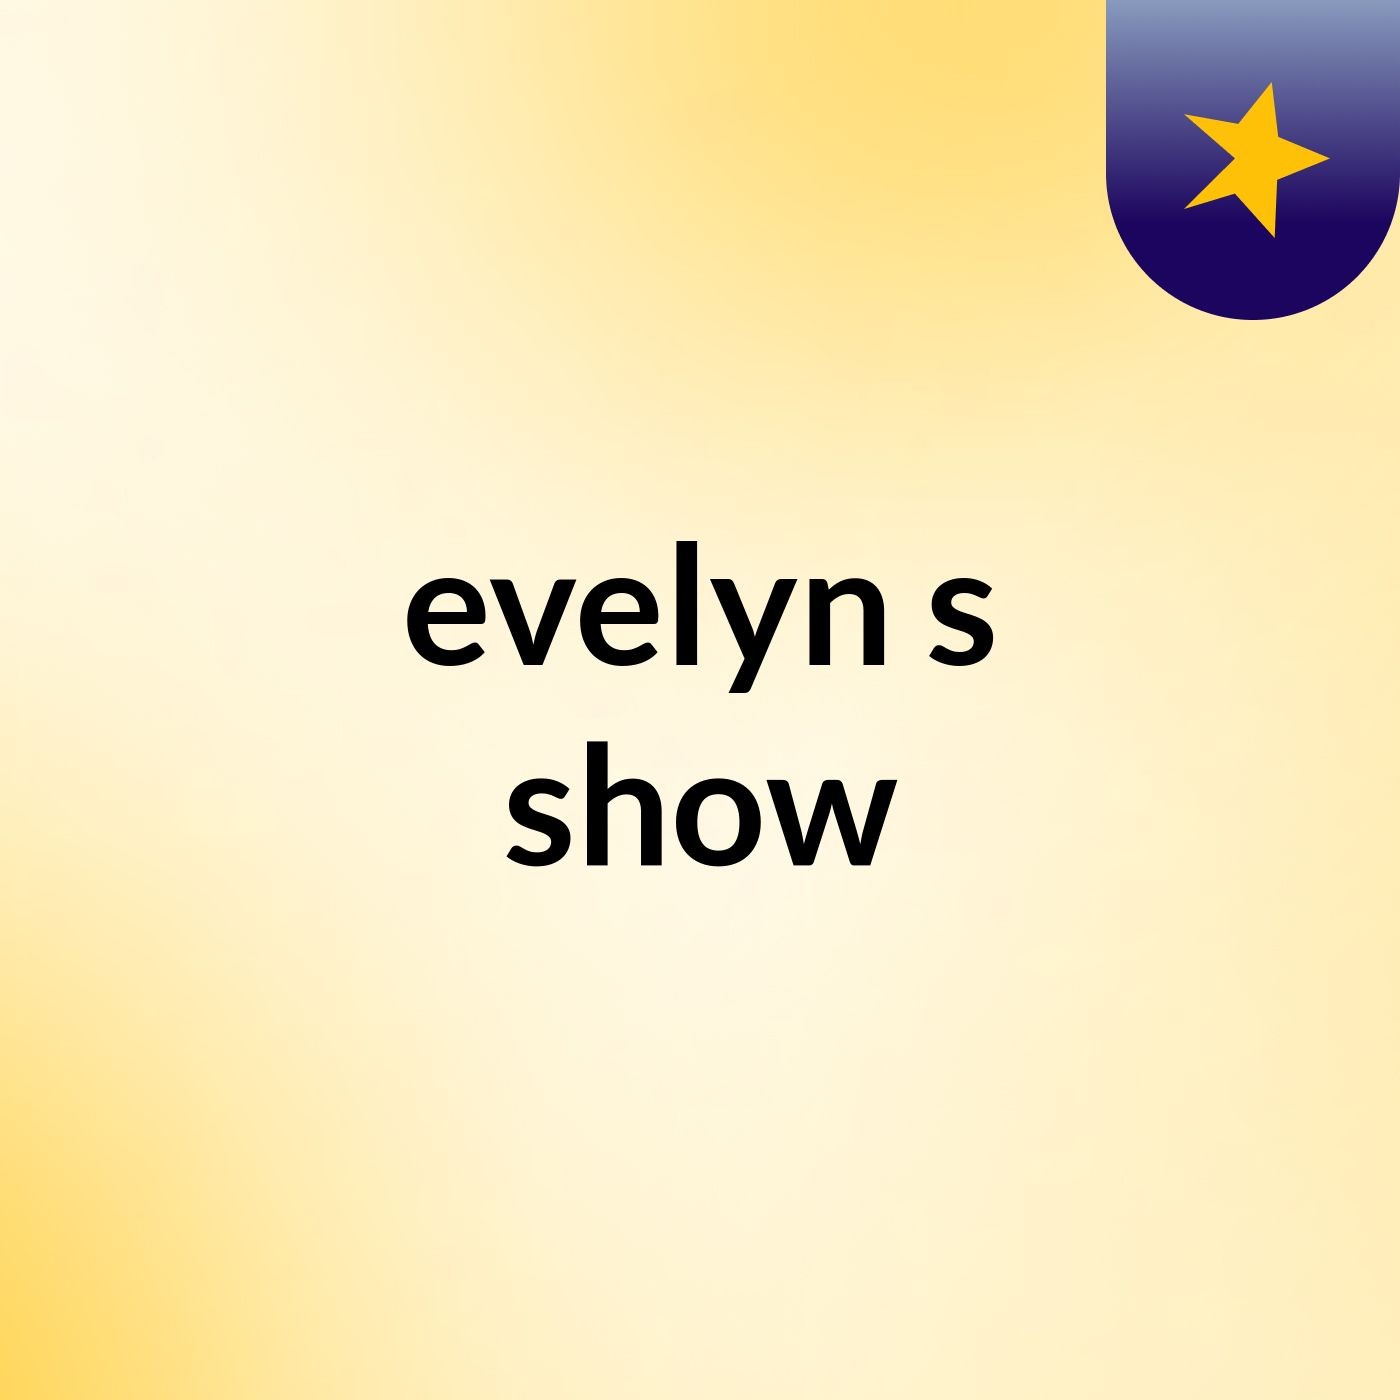 evelyn's show